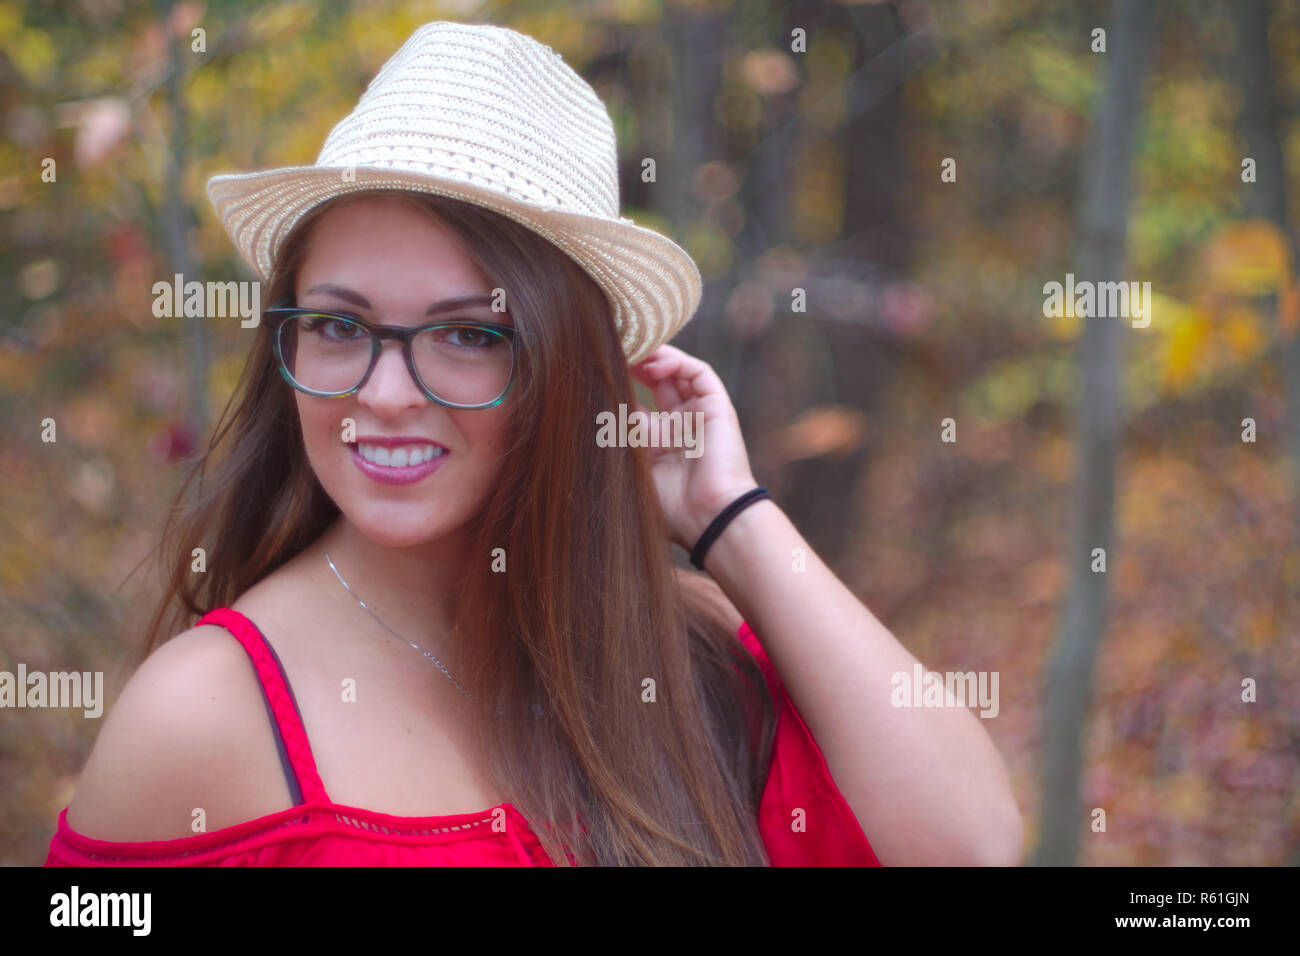 young woman hat glasses autumn red dress orange forest portrait Stock Photo